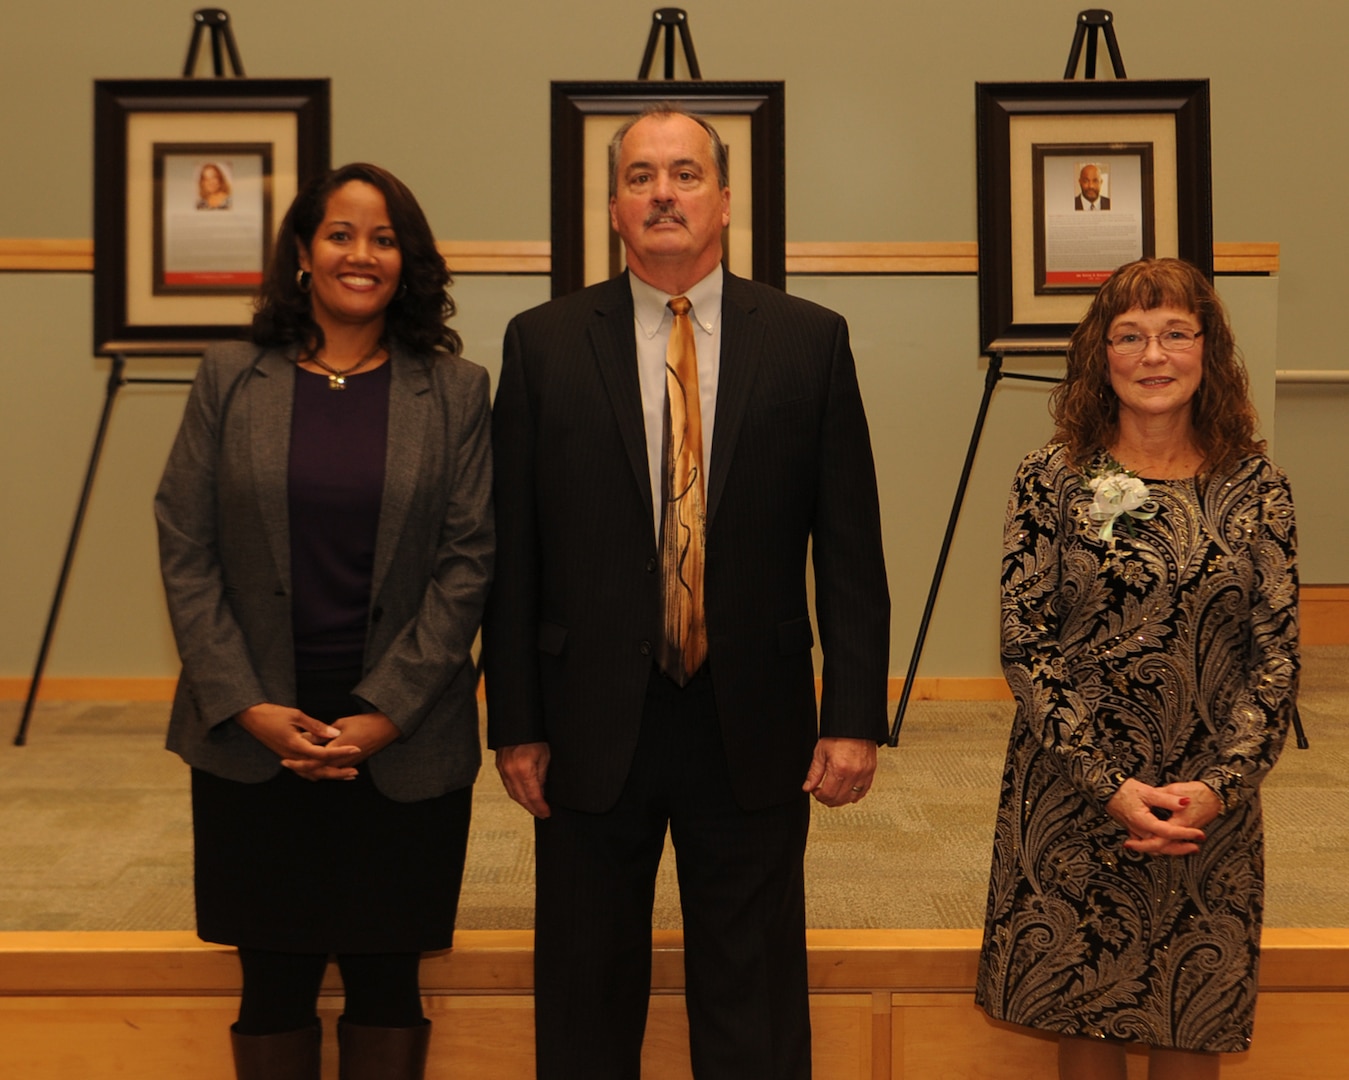 Carolyn Williford-Jackson (left), Keith Ford (center) and Jacqueline Basquill pose in front of framed plaques during the Defense Logistics Agency Troop Support Hall of Fame induction ceremony Nov. 13, 2018 in Philadelphia.